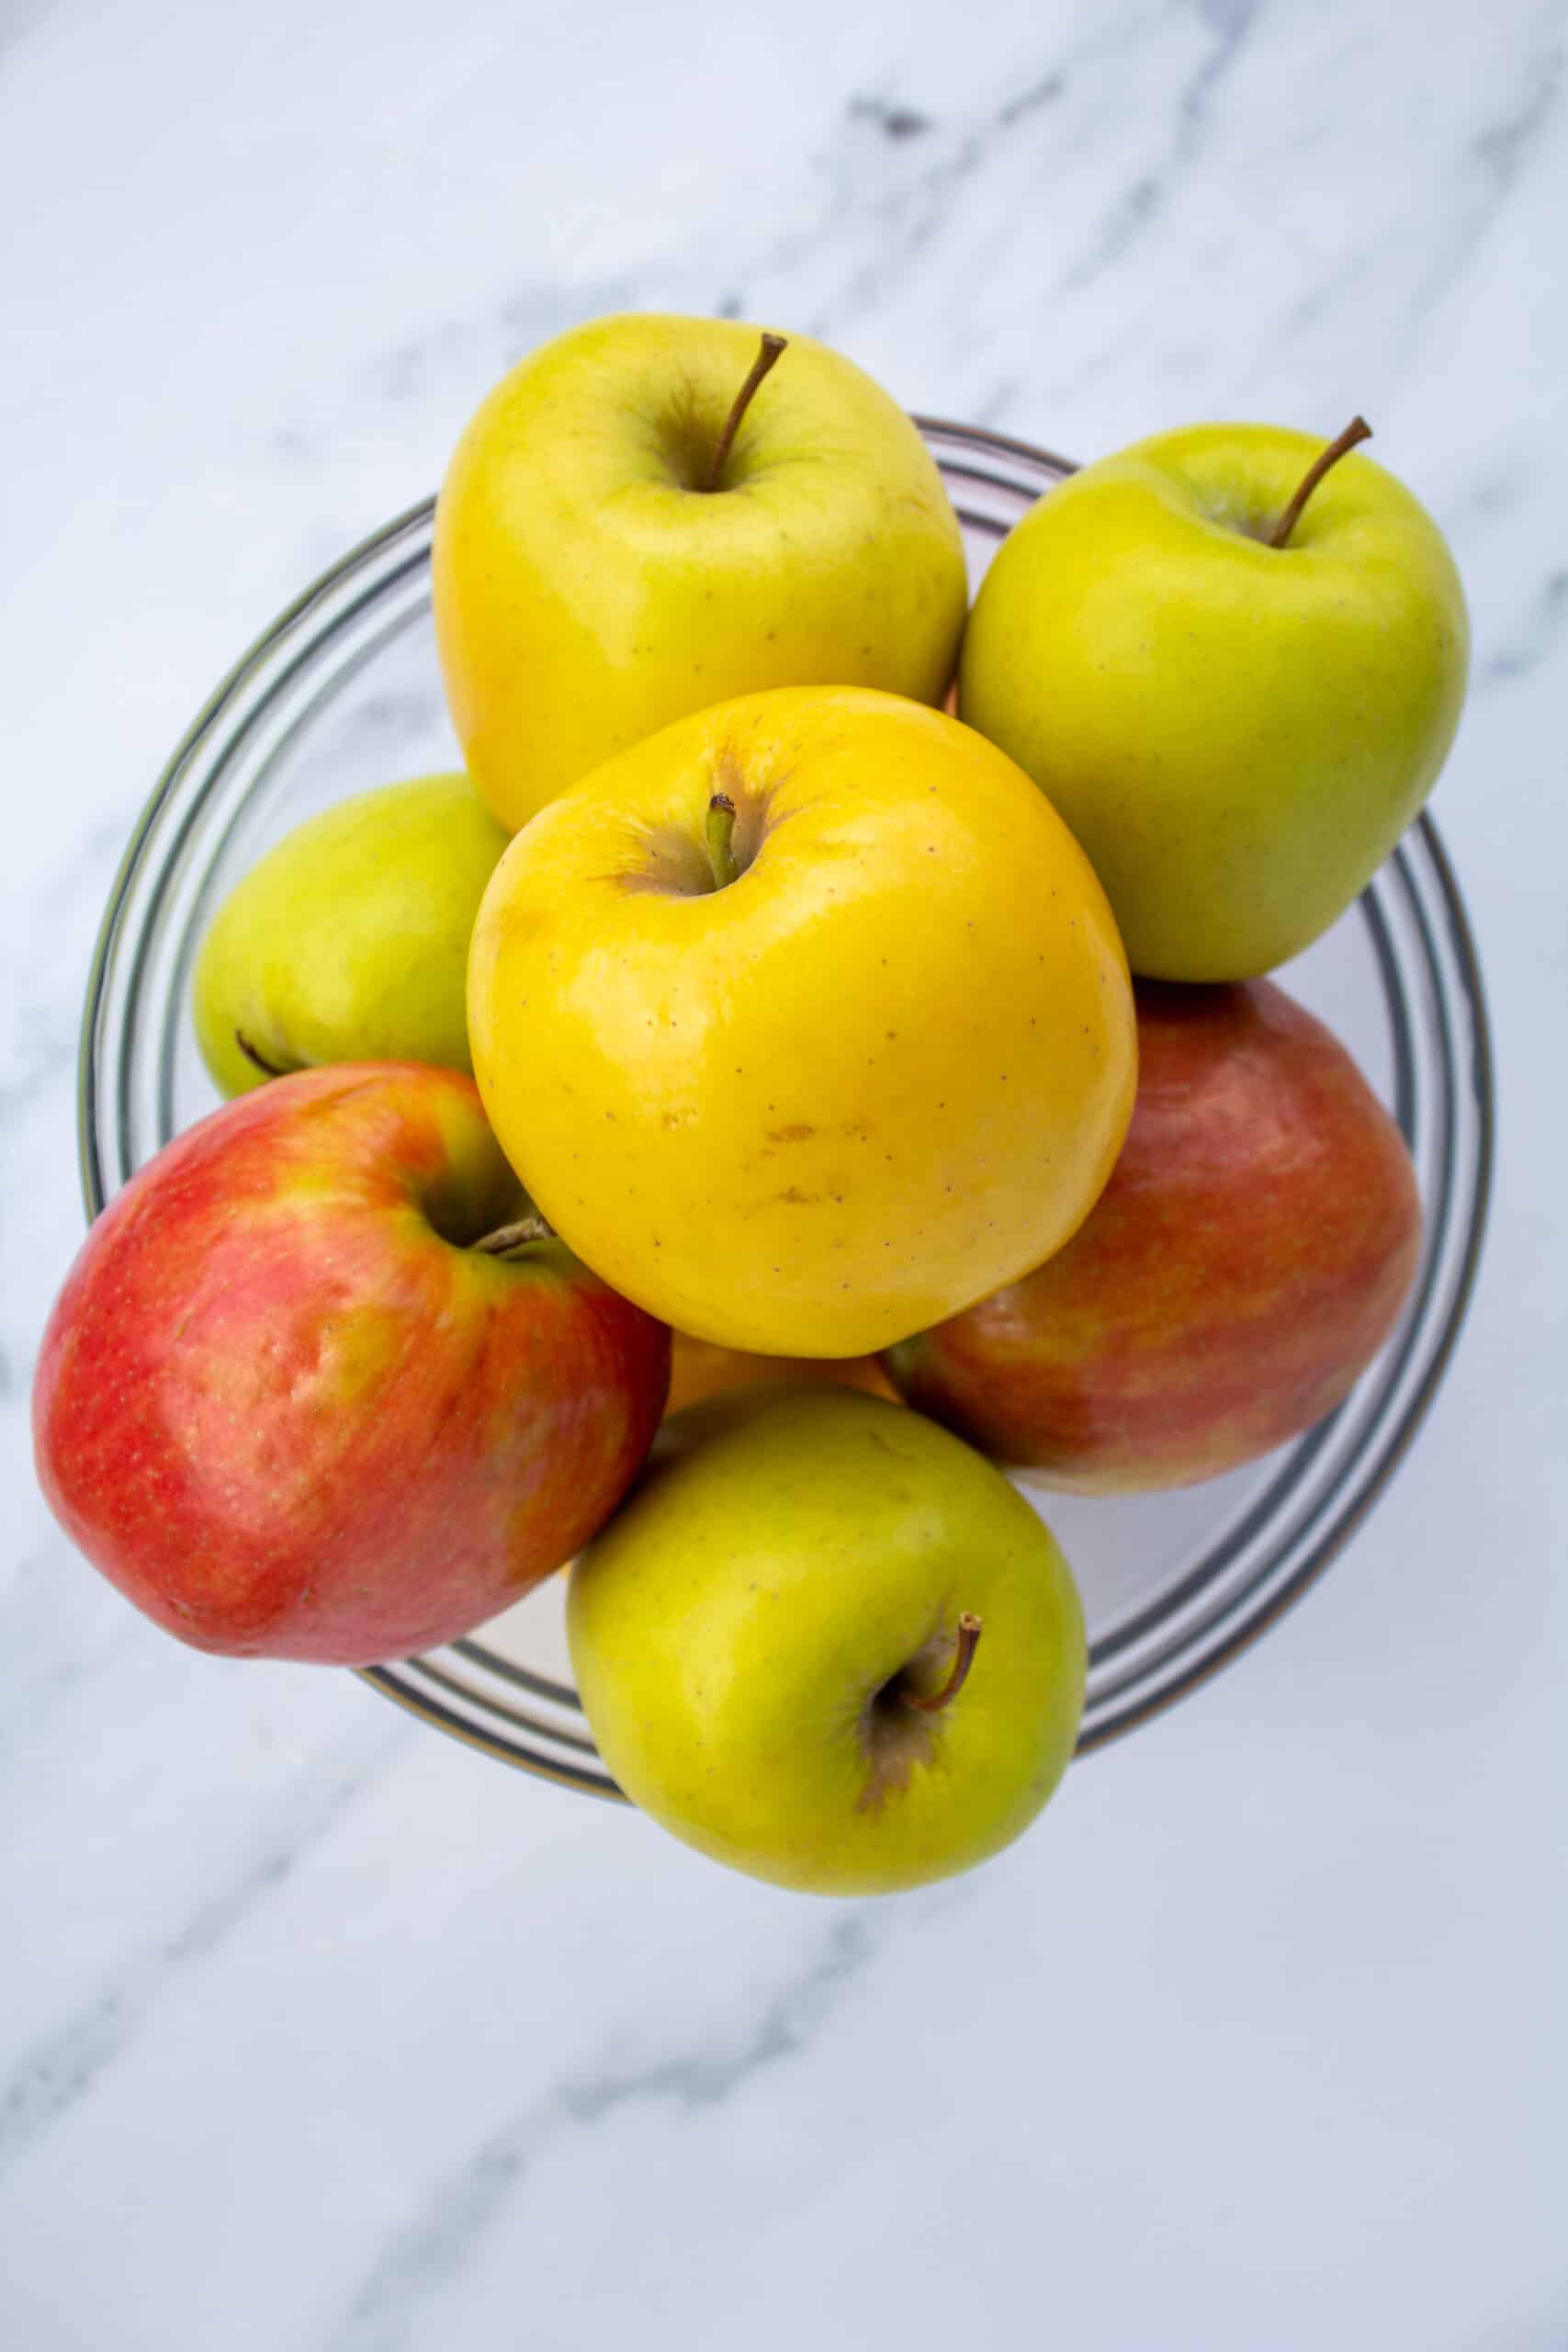 red and yellow apples in a glass bowl on a marble counter